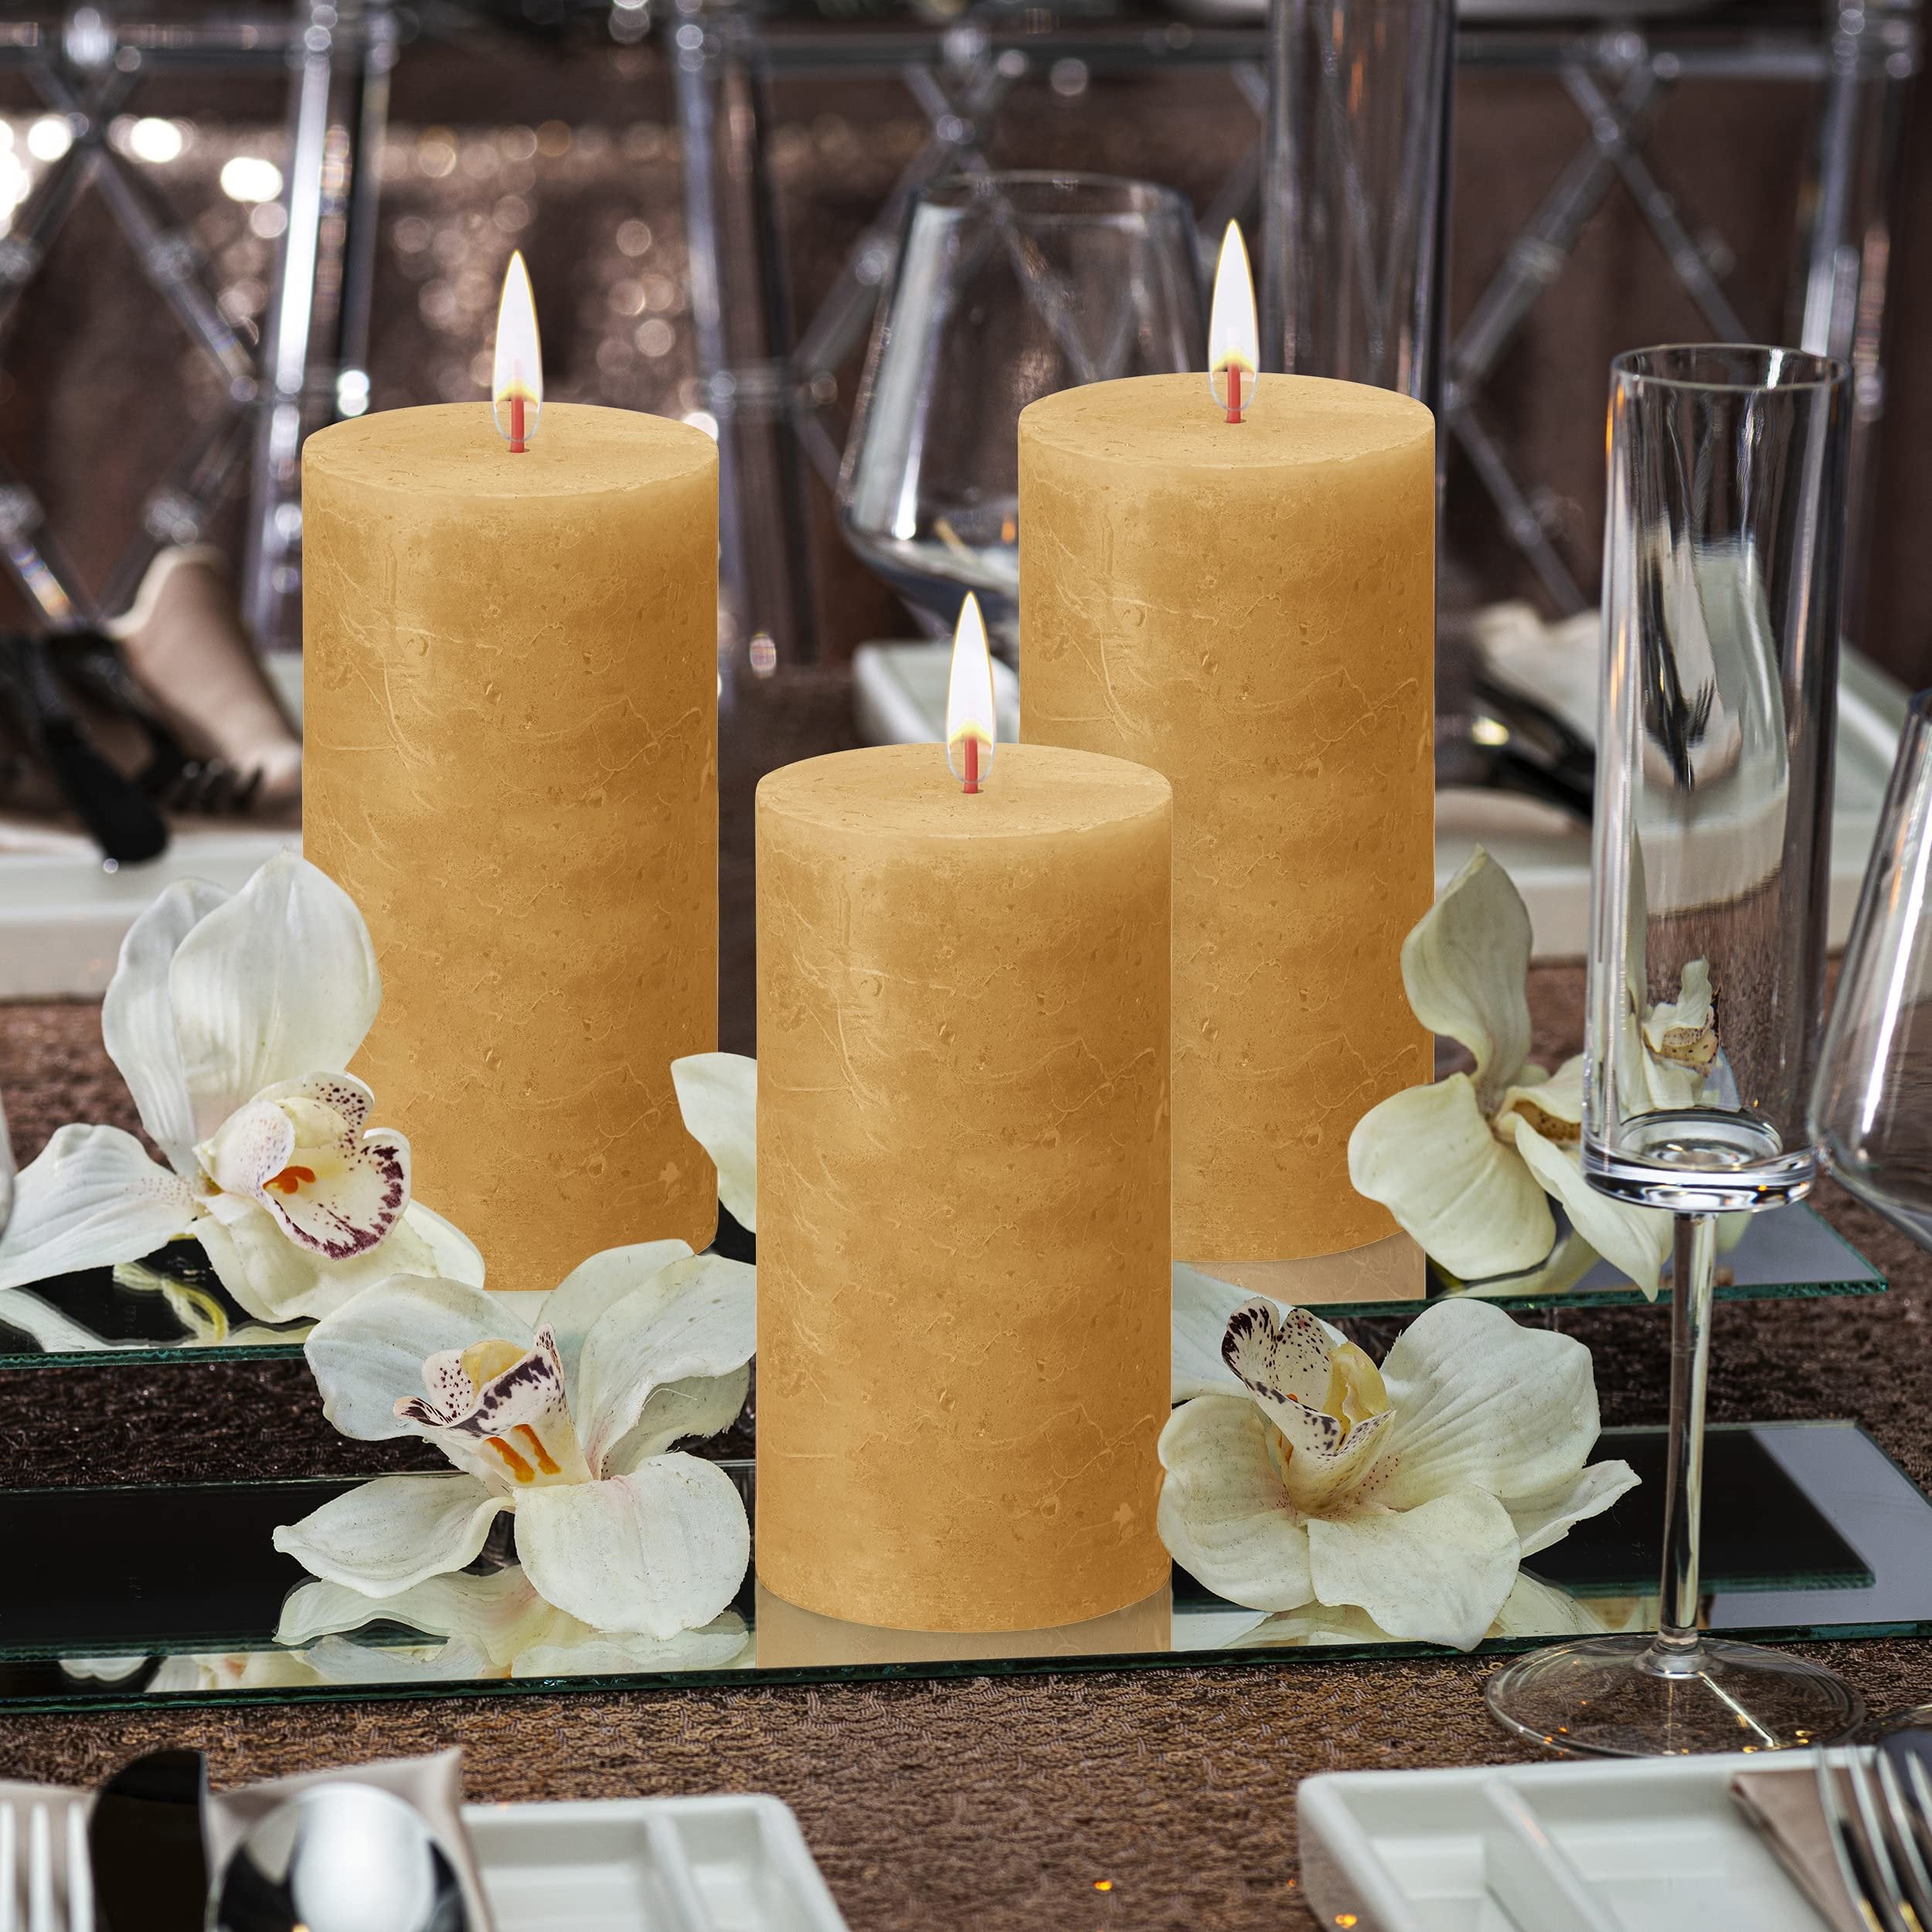 BOLSIUS 4 Pack Yellow Rustic Pillar Candles - 2.75 X 5 Inches - Premium European Quality - Includes Natural Plant-Based Wax - Unscented Dripless Smokeless 60 Hour Party Décor and Wedding Candles